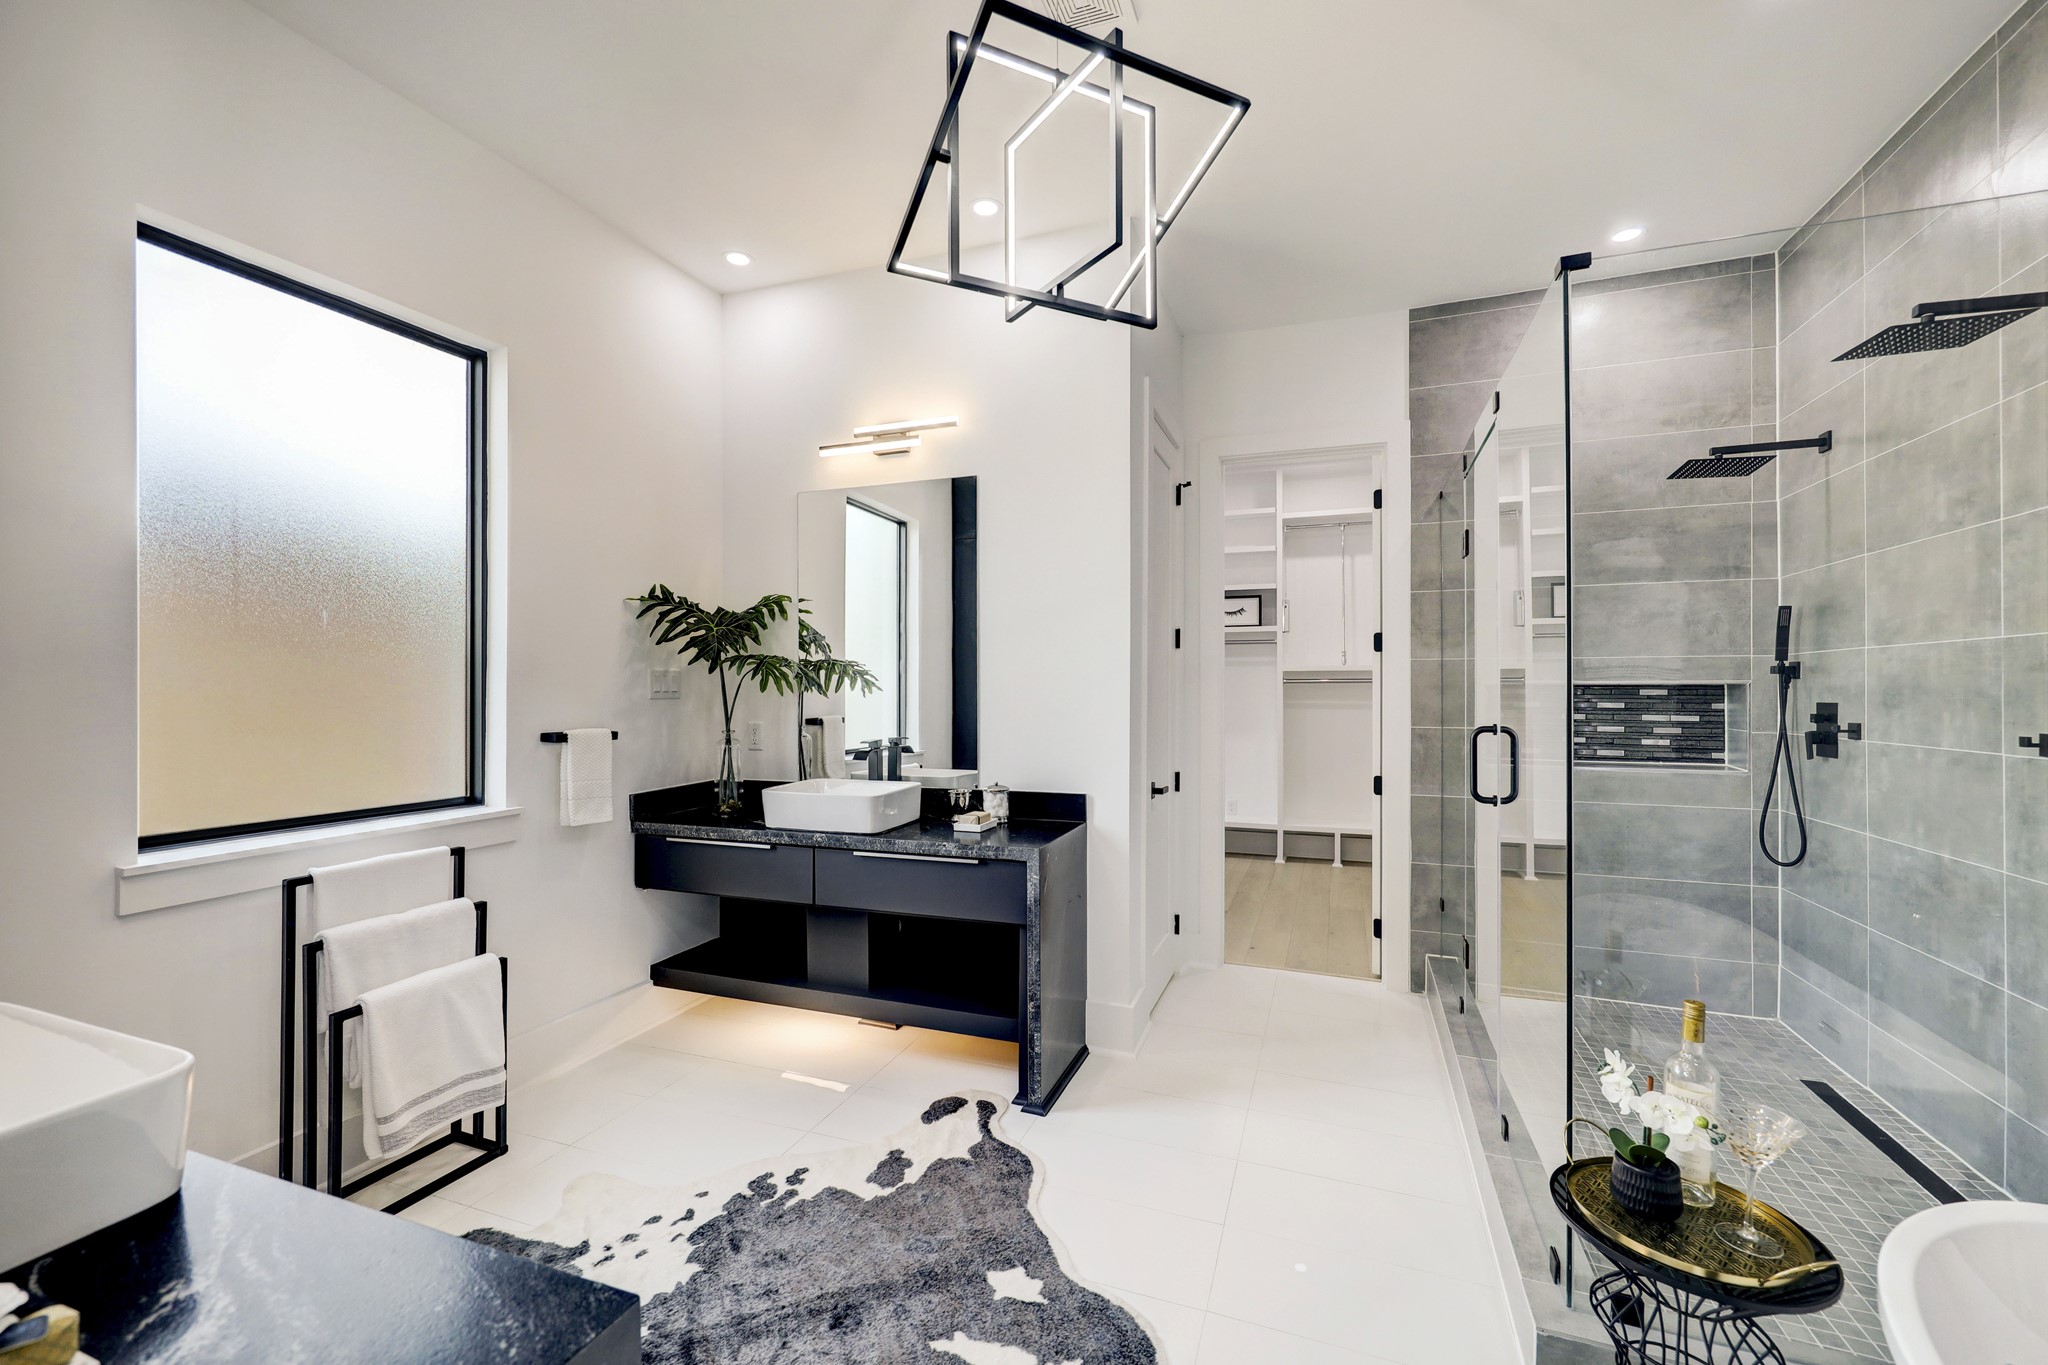 This luxurious owner's ensuite bathroom has everything you'll need to prepare for the busy day ahead. Find two separate vanities, an oversized walk-in shower for two, a freestanding tub with upgraded fixtures and a private water closet.